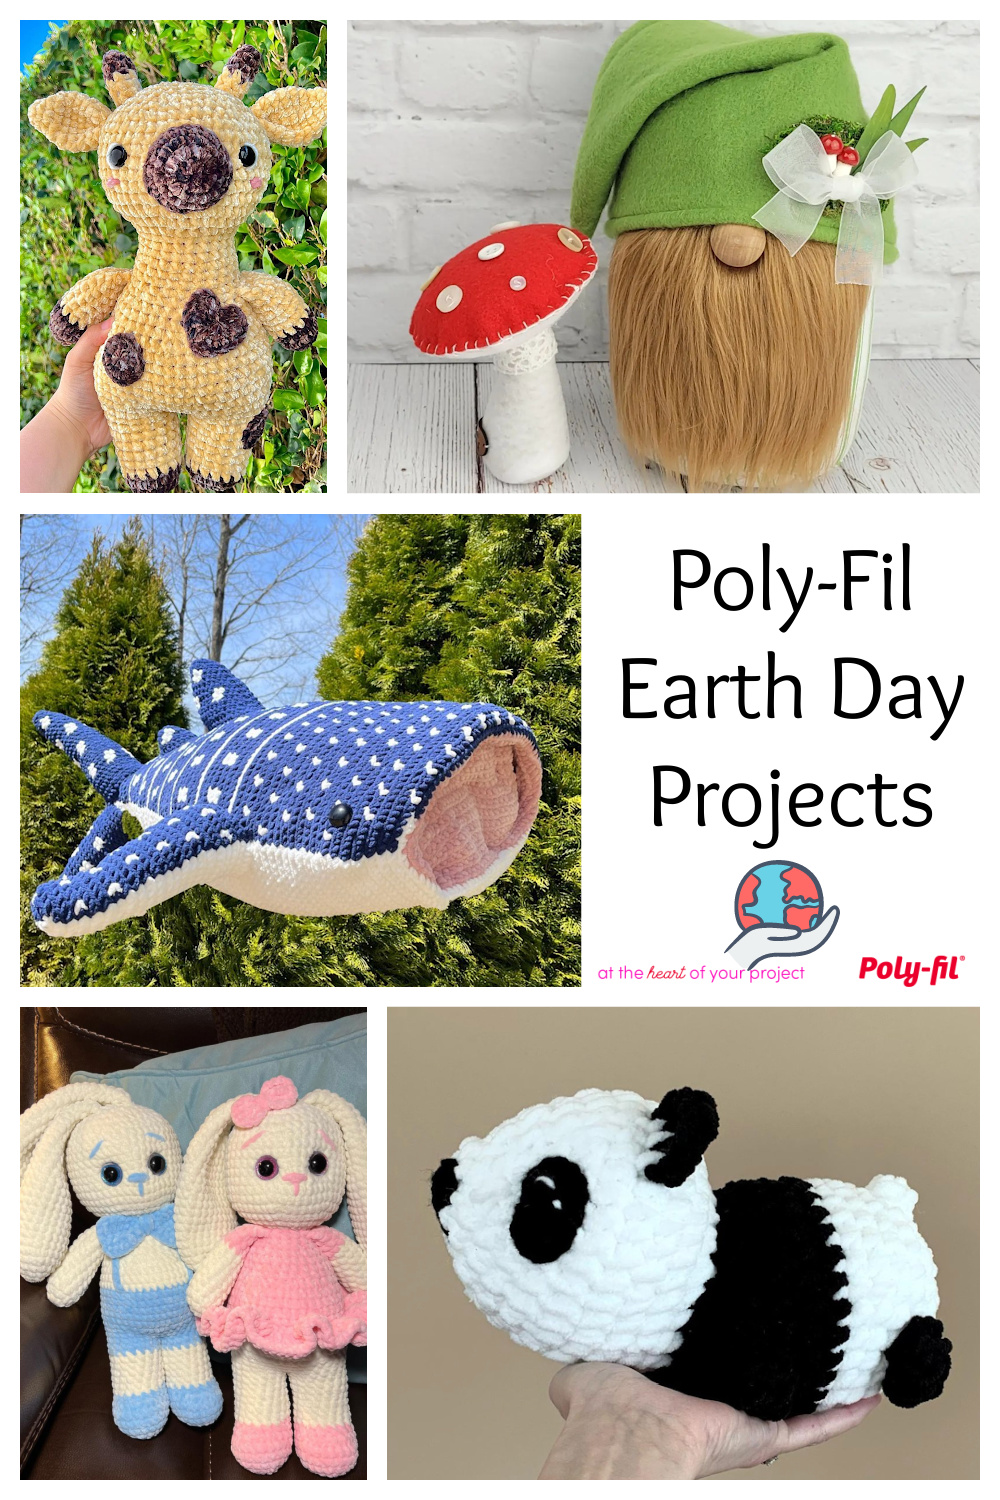 Poly-Fil Earth day projects